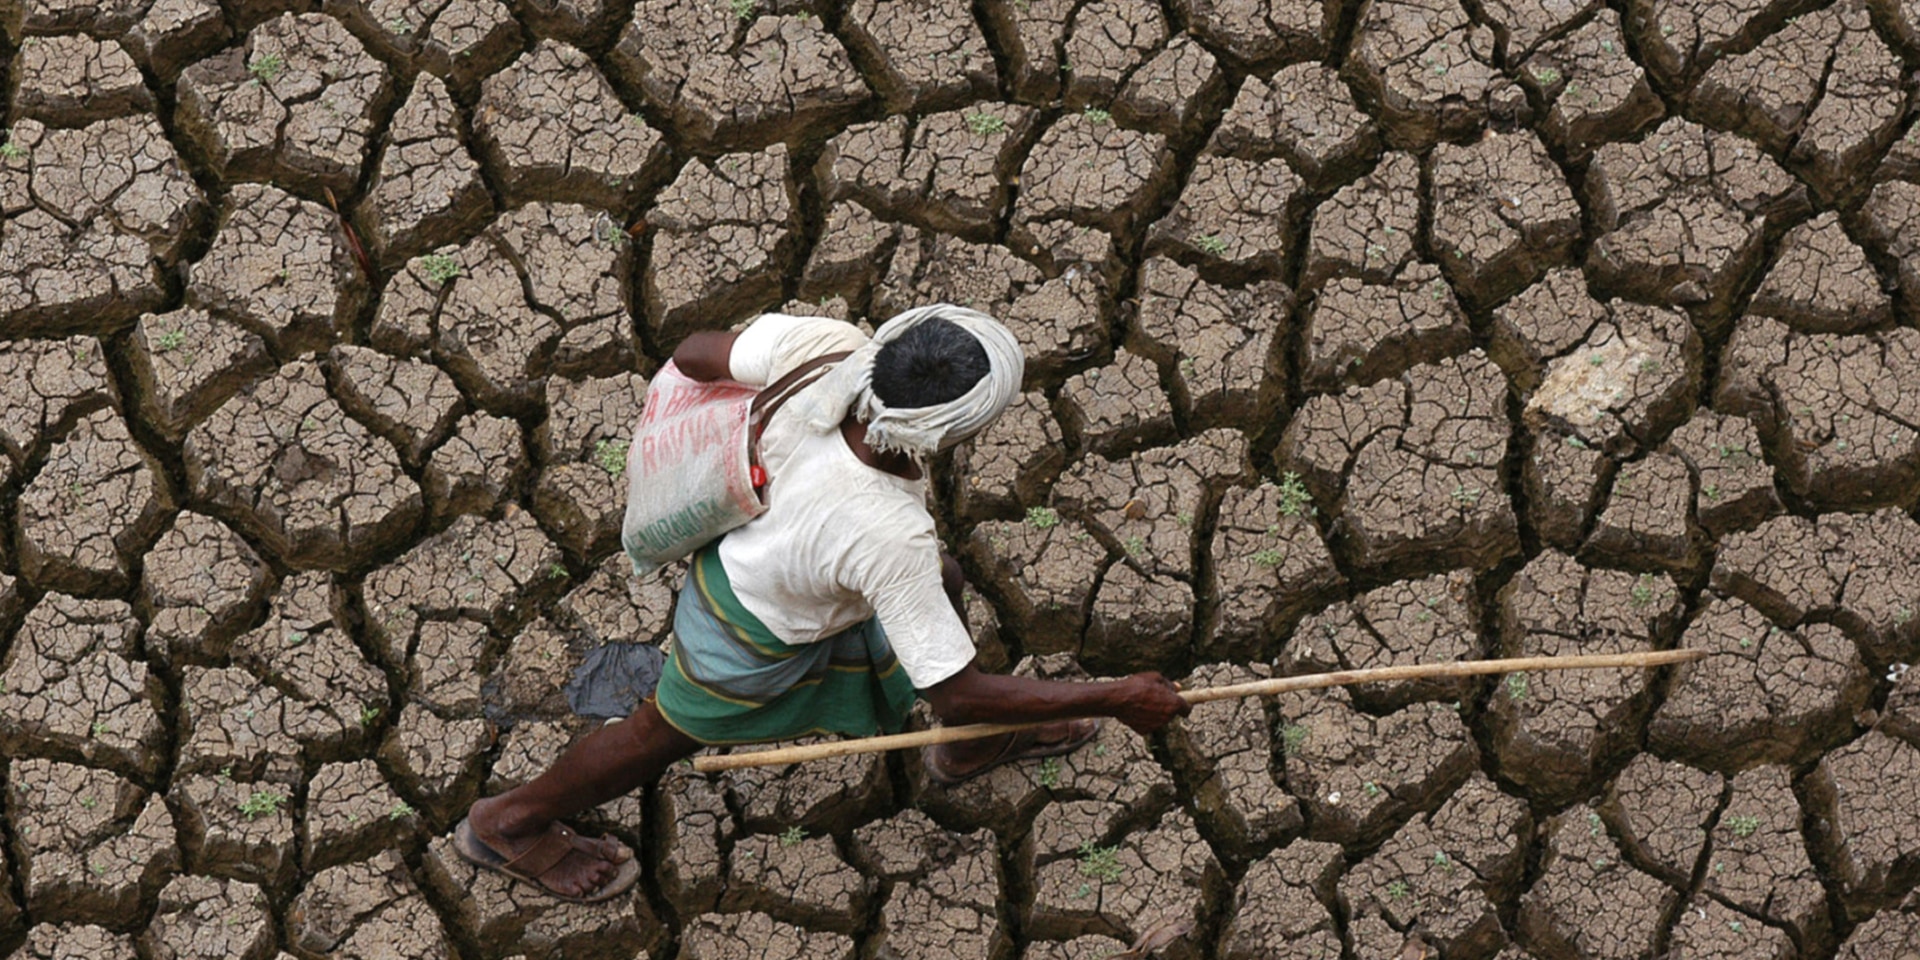 A man walking across a parched field.